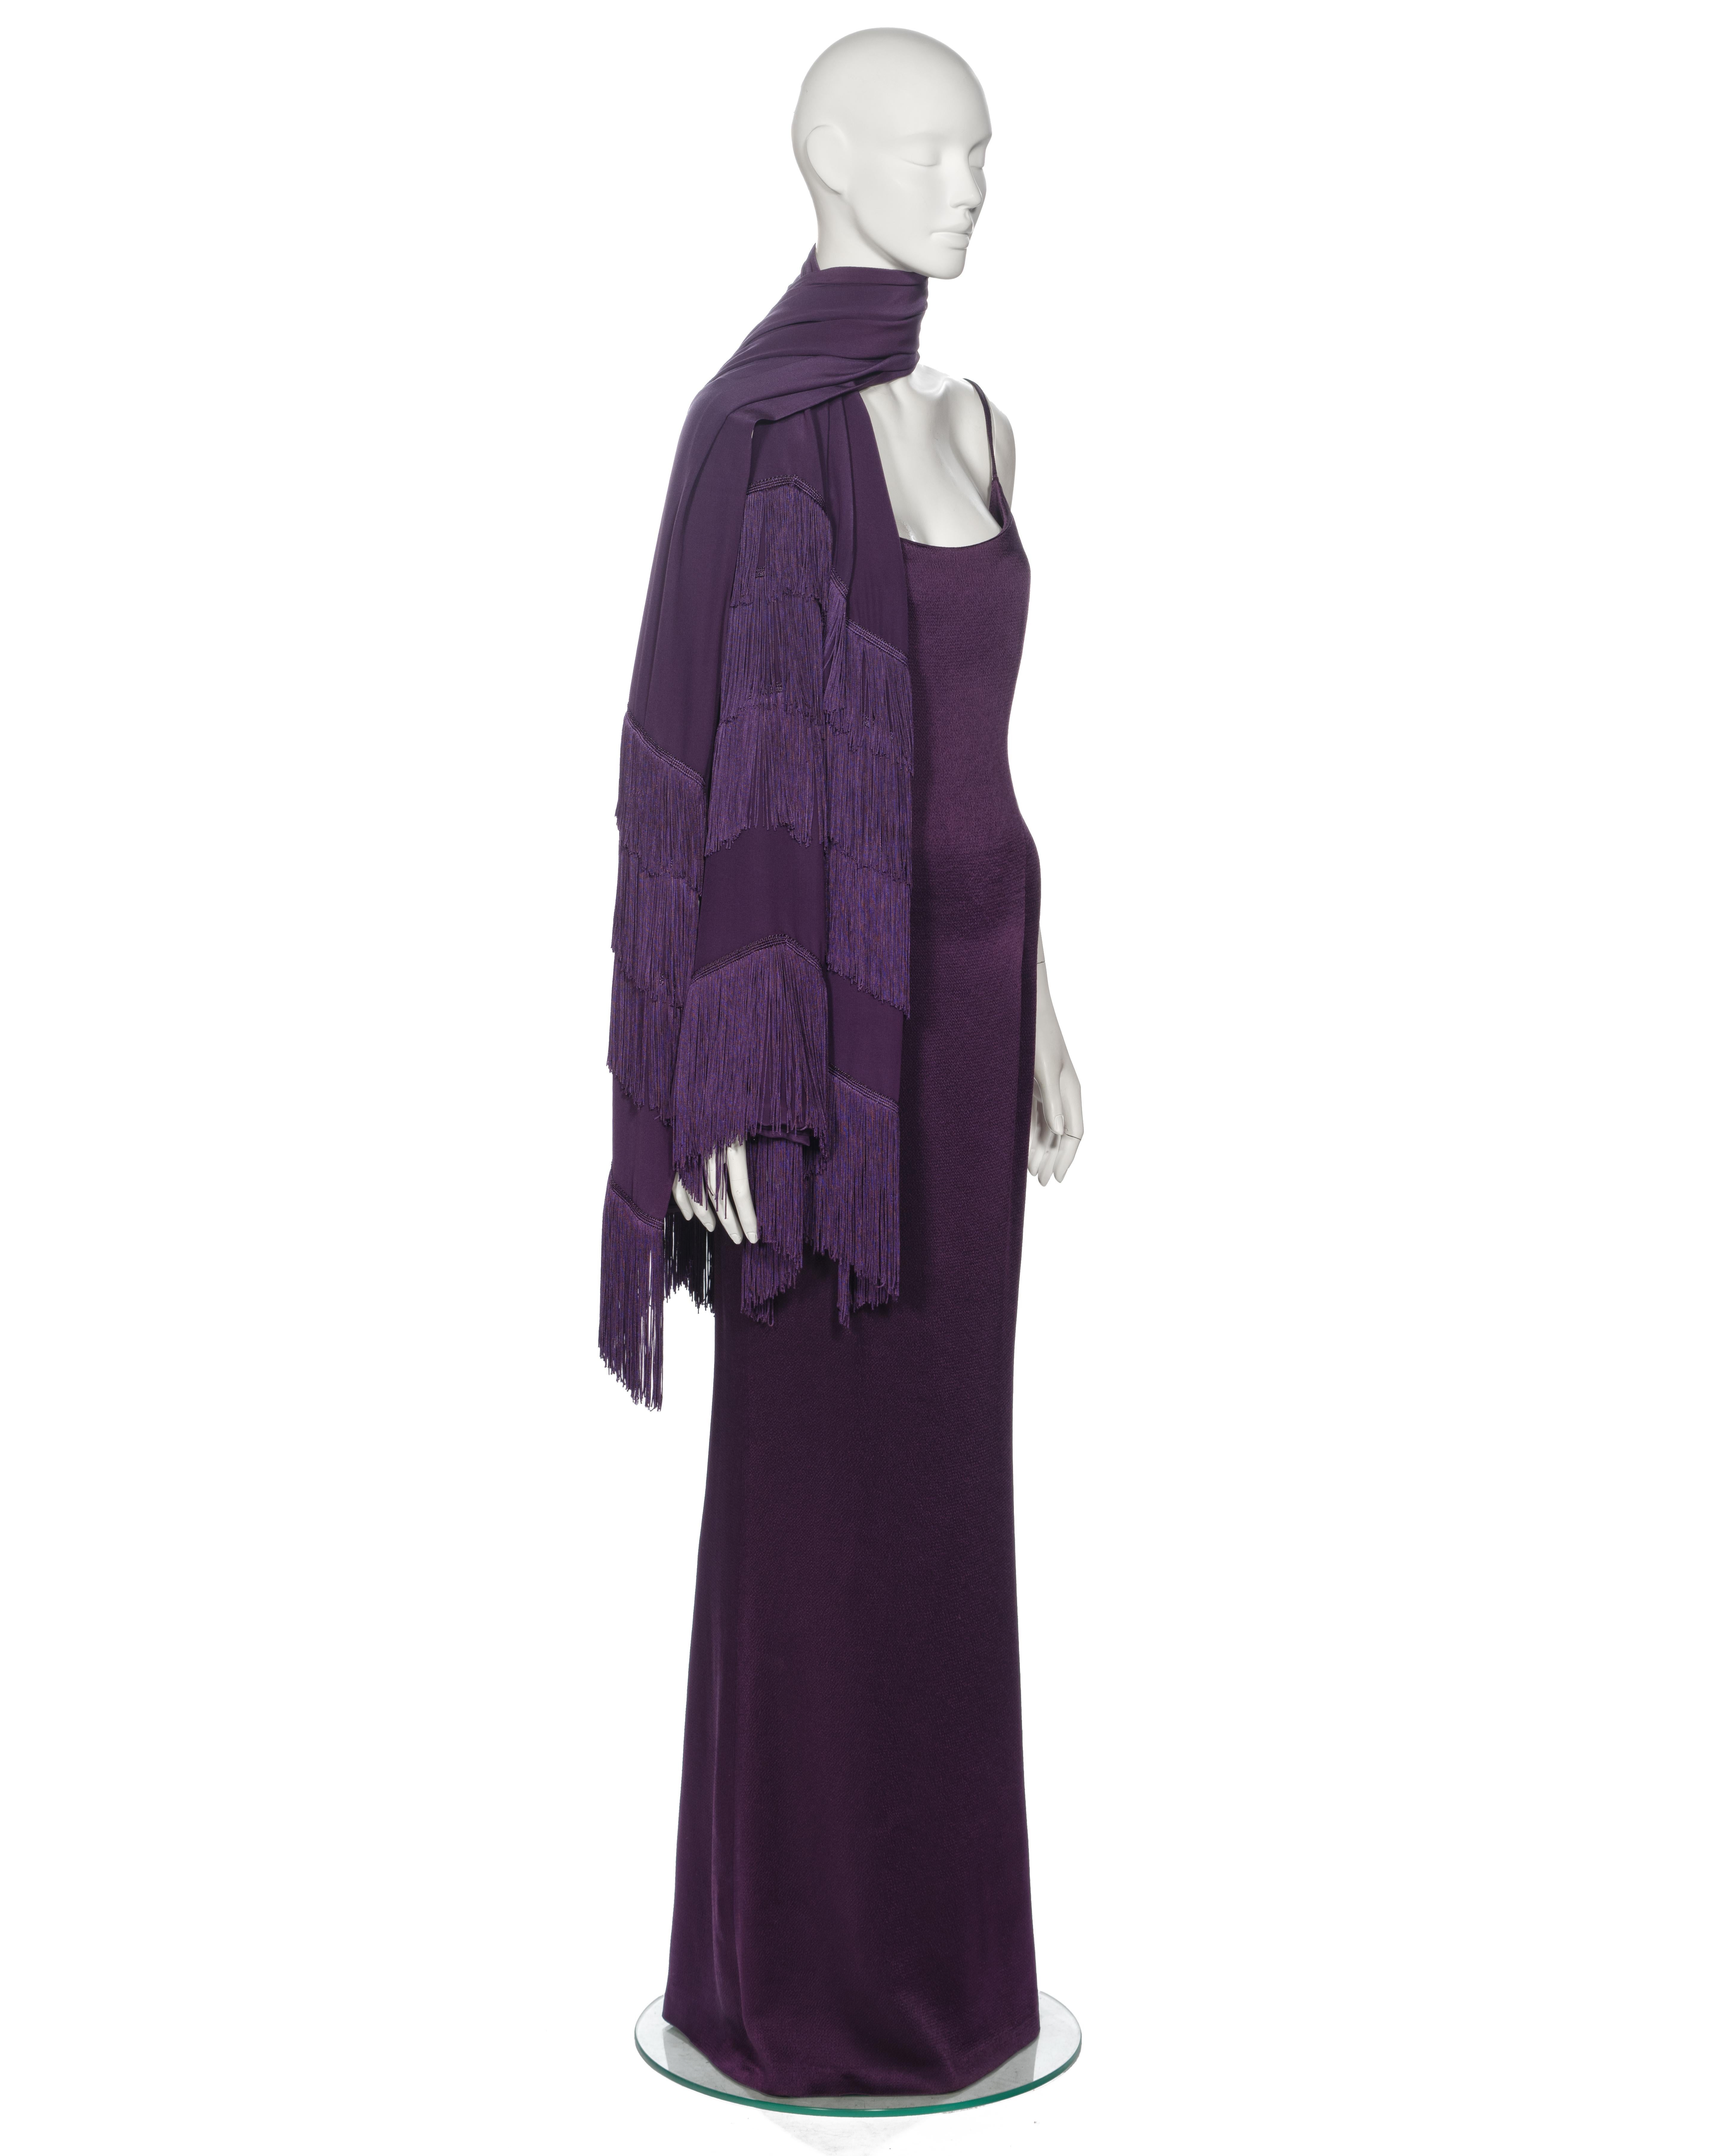 Christian Dior by John Galliano Purple Satin Evening Dress and Shawl, ss 1998 For Sale 1